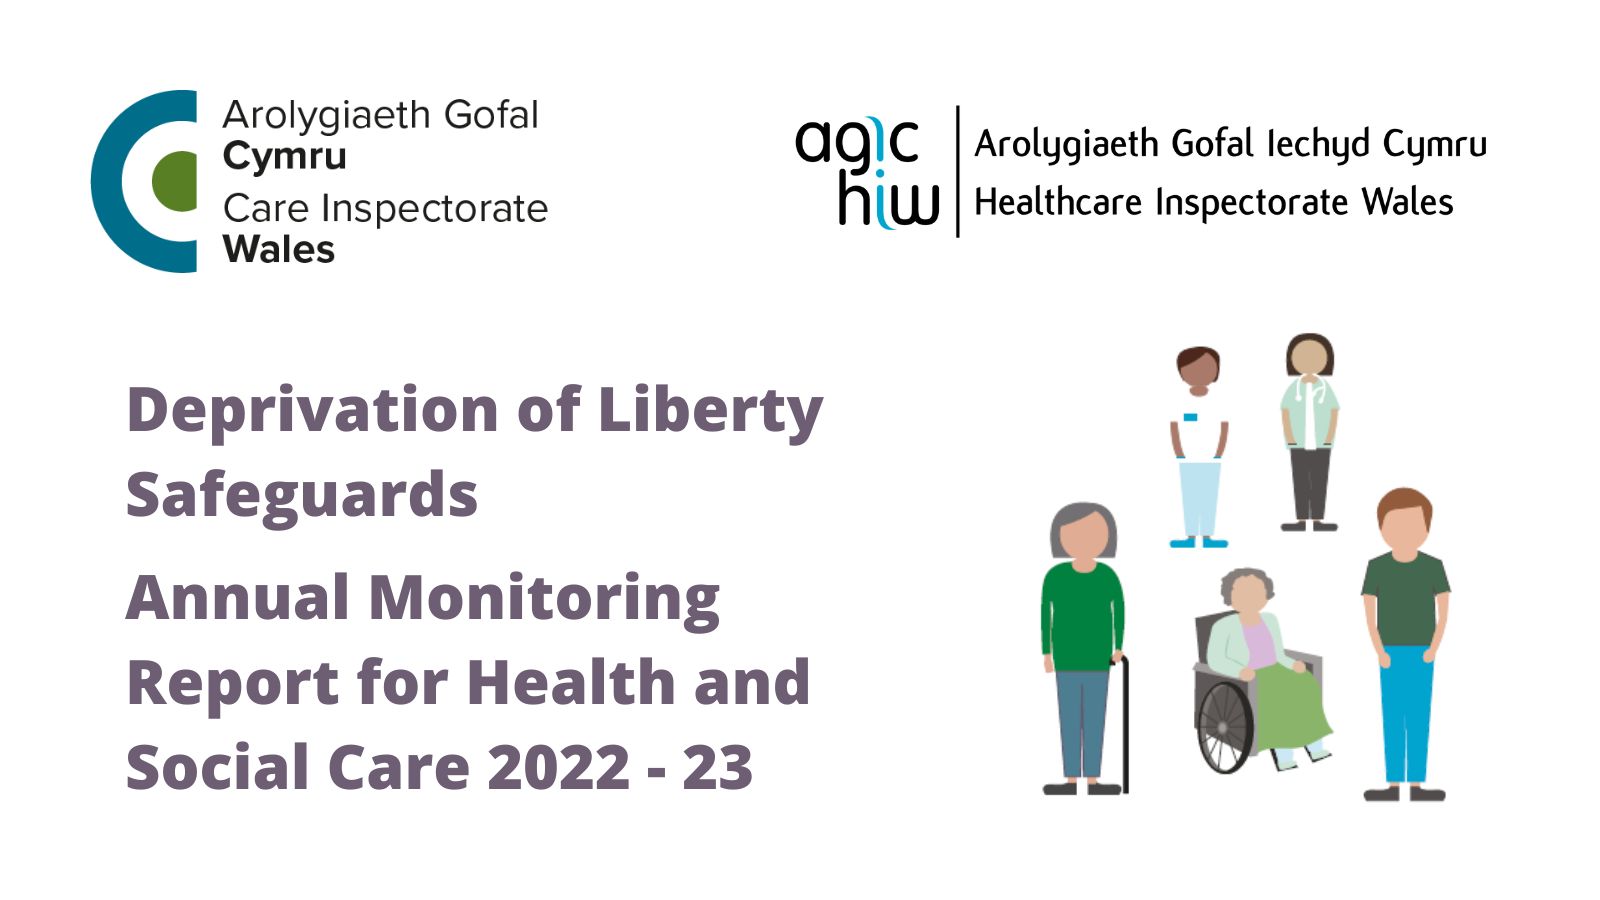 Deprivation of Liberty Safeguards Annual Monitoring Report for Health and Social Care 2022 - 23